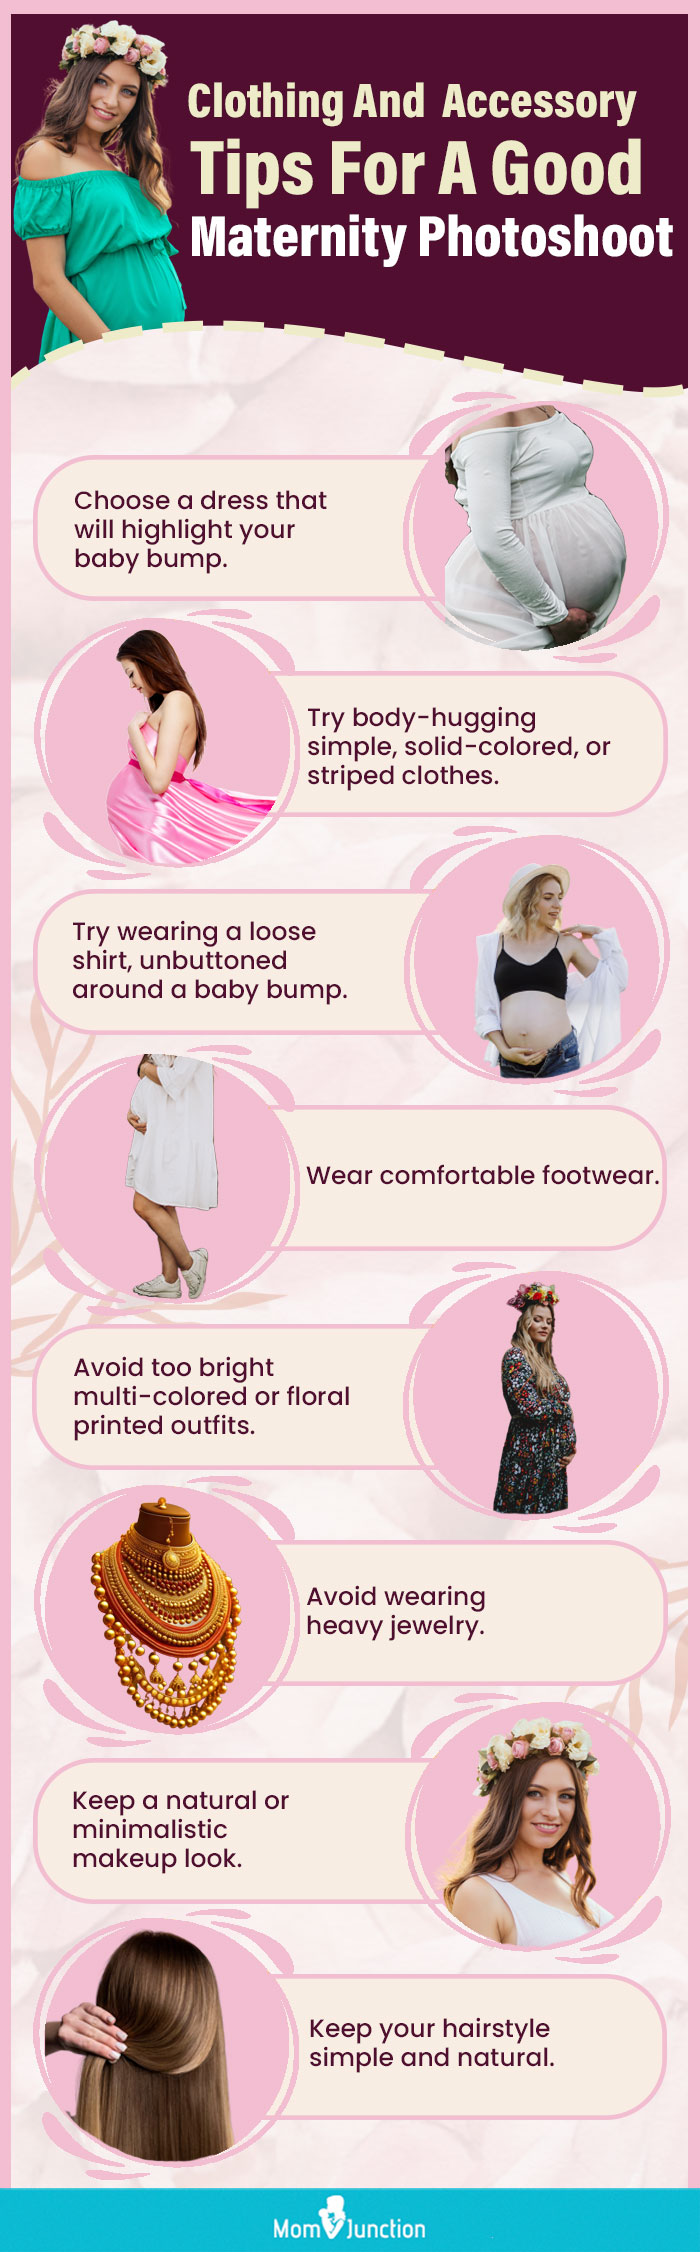 clothing and accessory tips for a good maternity photoshoot (infographic)